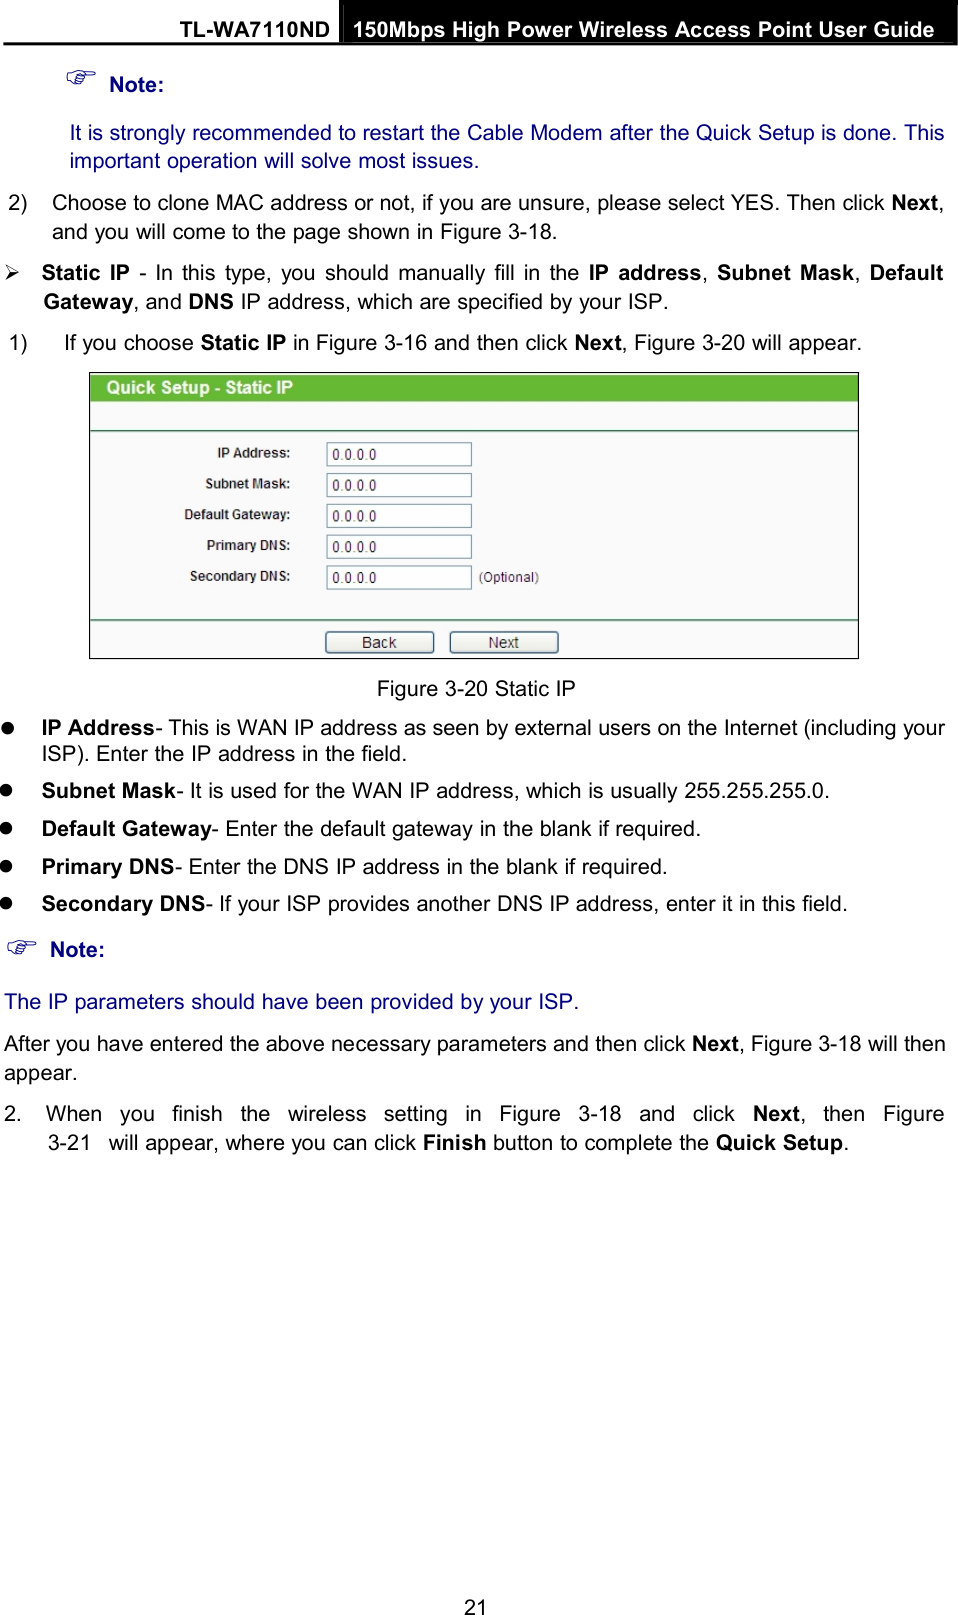 Note:TL-WA7110ND 150Mbps High Power Wireless Access Point User GuideIt is strongly recommended to restart the Cable Modem after the Quick Setup is done. Thisimportant operation will solve most issues.2) Choose to clone MAC address or not, if you are unsure, please select YES. Then click Next,and you will come to the page shown in Figure 3-18.Static IP - In this type, you should manually fill in the IP address,Subnet Mask,DefaultGateway, and DNS IP address, which are specified by your ISP.1) If you choose Static IP in Figure 3-16 and then click Next, Figure 3-20 will appear.Figure 3-20 Static IPIP Address- This is WAN IP address as seen by external users on the Internet (including yourISP). Enter the IP address in the field.Subnet Mask- It is used for the WAN IP address, which is usually 255.255.255.0.Default Gateway- Enter the default gateway in the blank if required.Primary DNS- Enter the DNS IP address in the blank if required.Secondary DNS- If your ISP provides another DNS IP address, enter it in this field.Note:The IP parameters should have been provided by your ISP.After you have entered the above necessary parameters and then click Next, Figure 3-18 will thenappear.2. When you finish the wireless setting in Figure 3-18 and click Next, then Figure3-21 will appear, where you can click Finish button to complete the Quick Setup.21